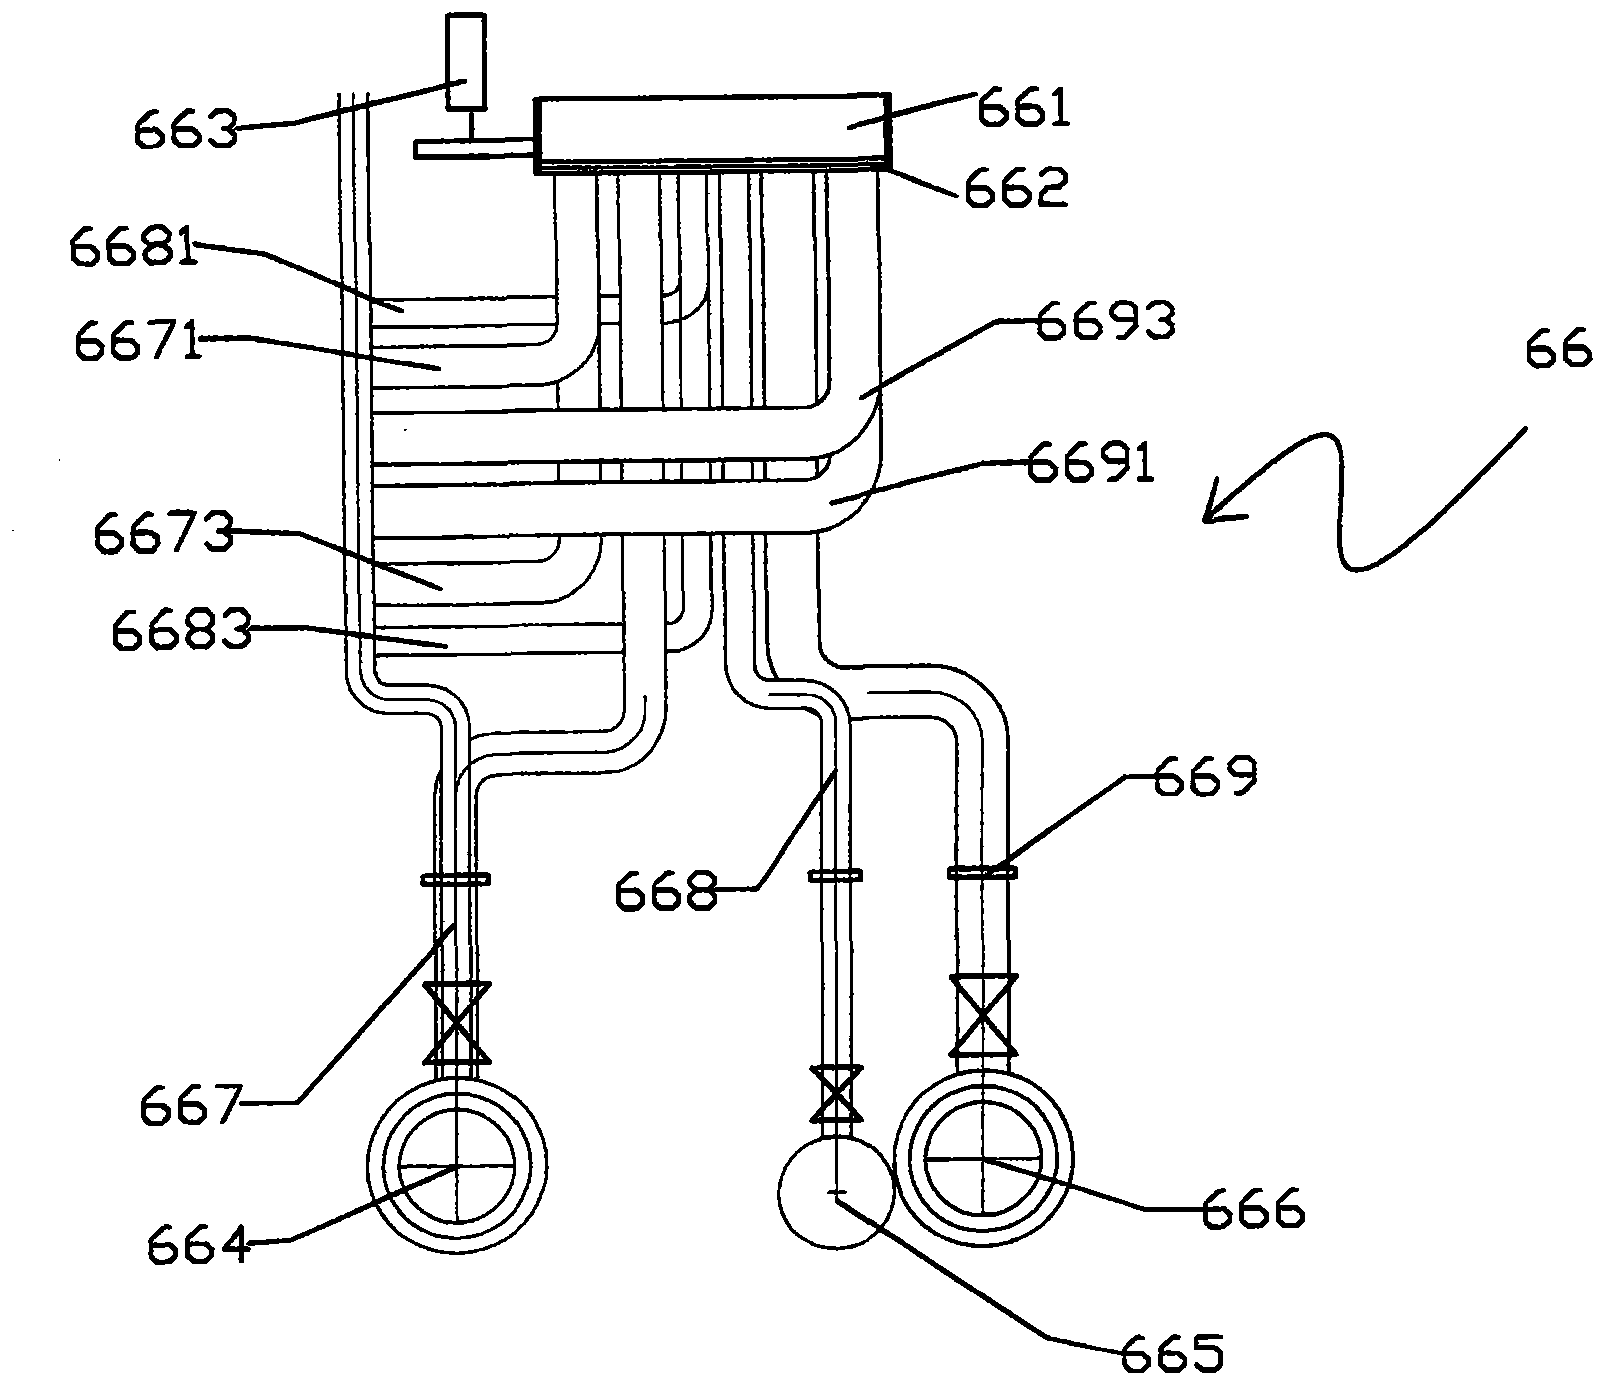 Heat storage and heat exchange method for coal pyrolysis furnace combustion heater